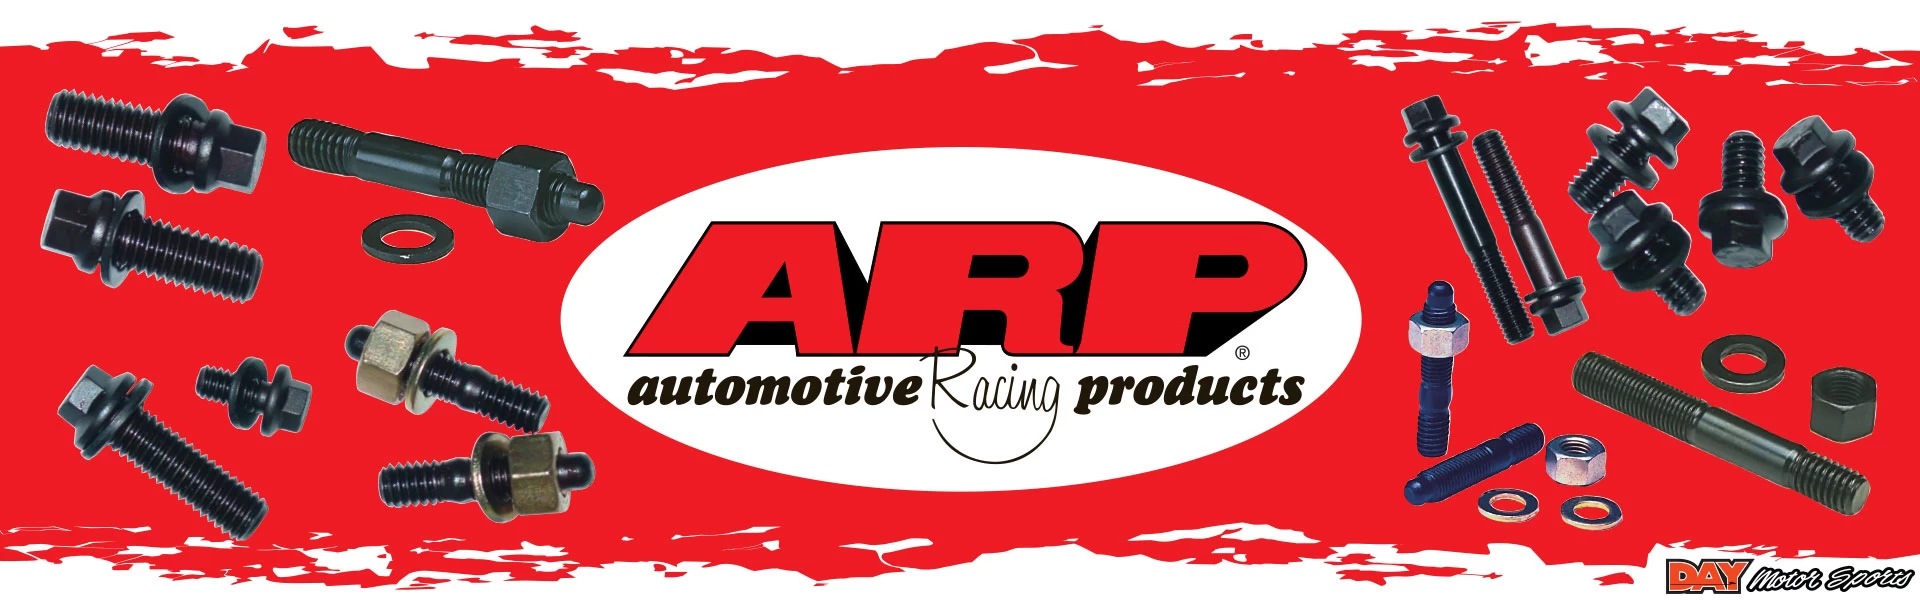 ARP engine assembly fasteners, accessory fasteners, and fastener assembly lubricant available at Day Motor Sports.